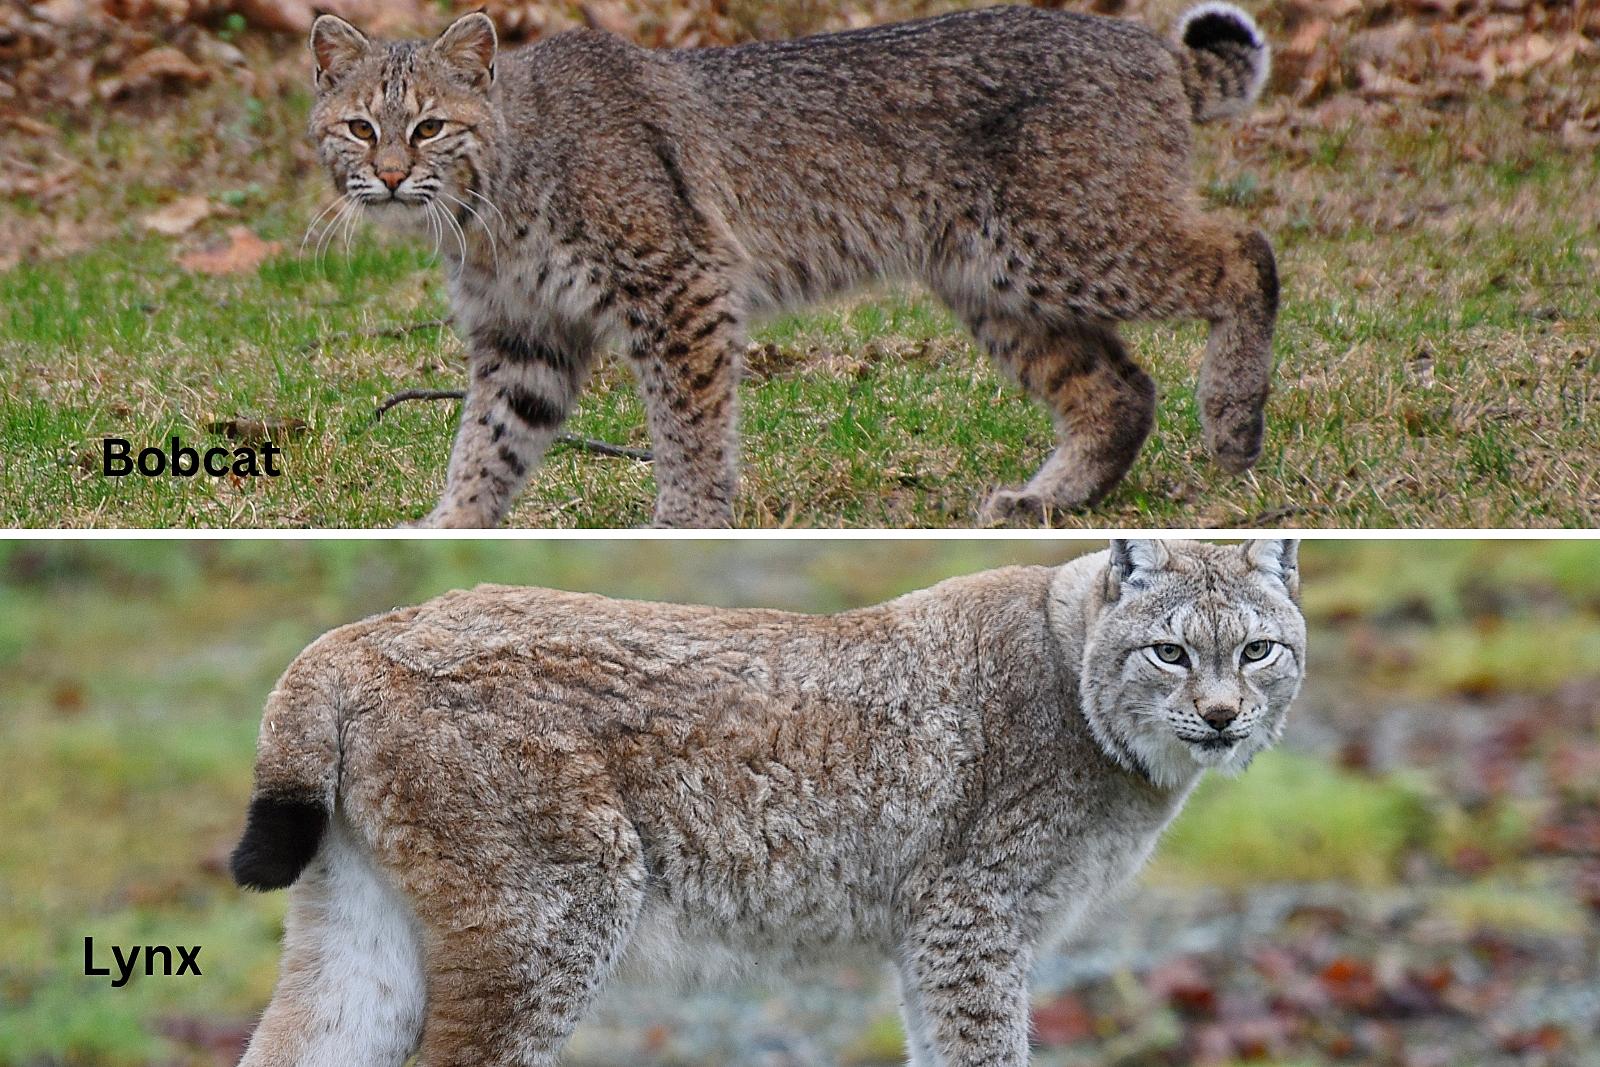 Bobcat or lynx? Here's how you can tell